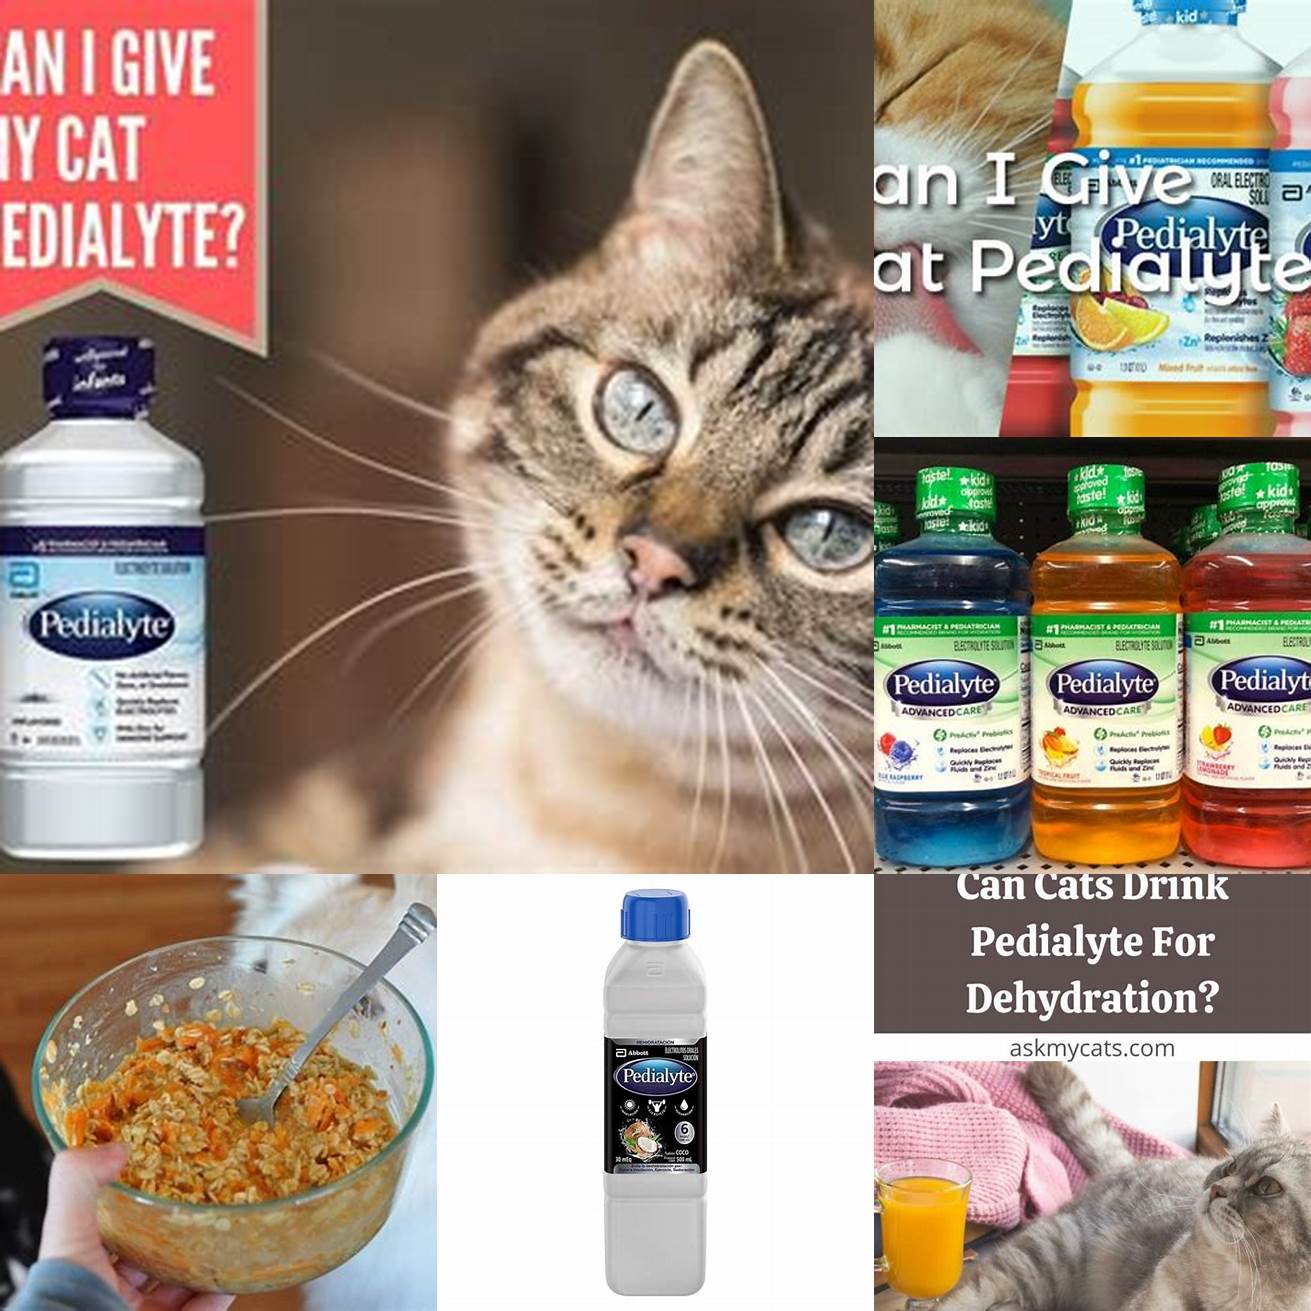 Q Can I mix Pedialyte with my cats food